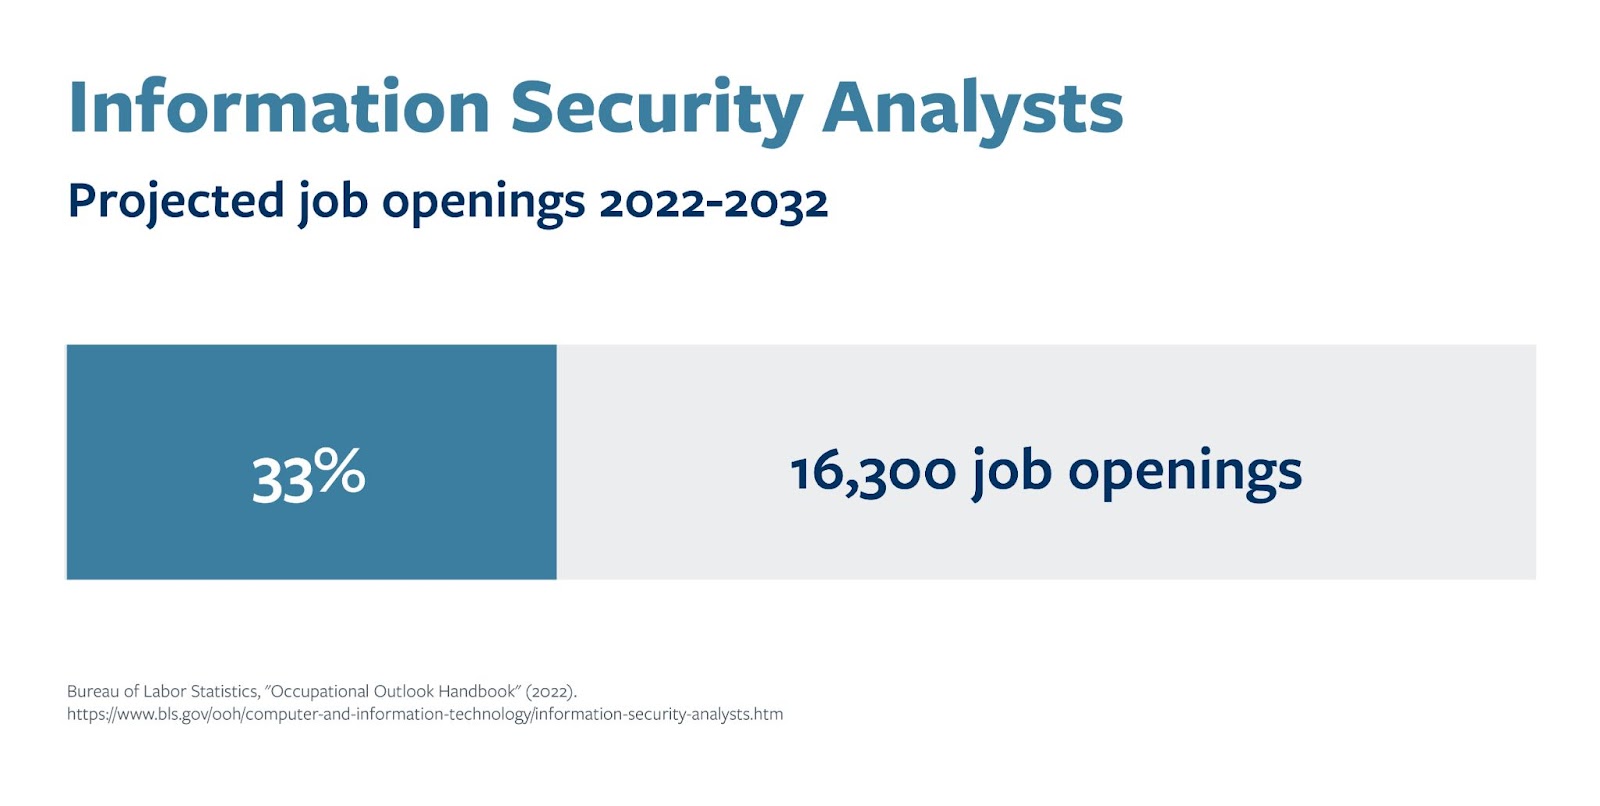 A chart that shows the projected job openings and field growth for Information security analysts through 2032.